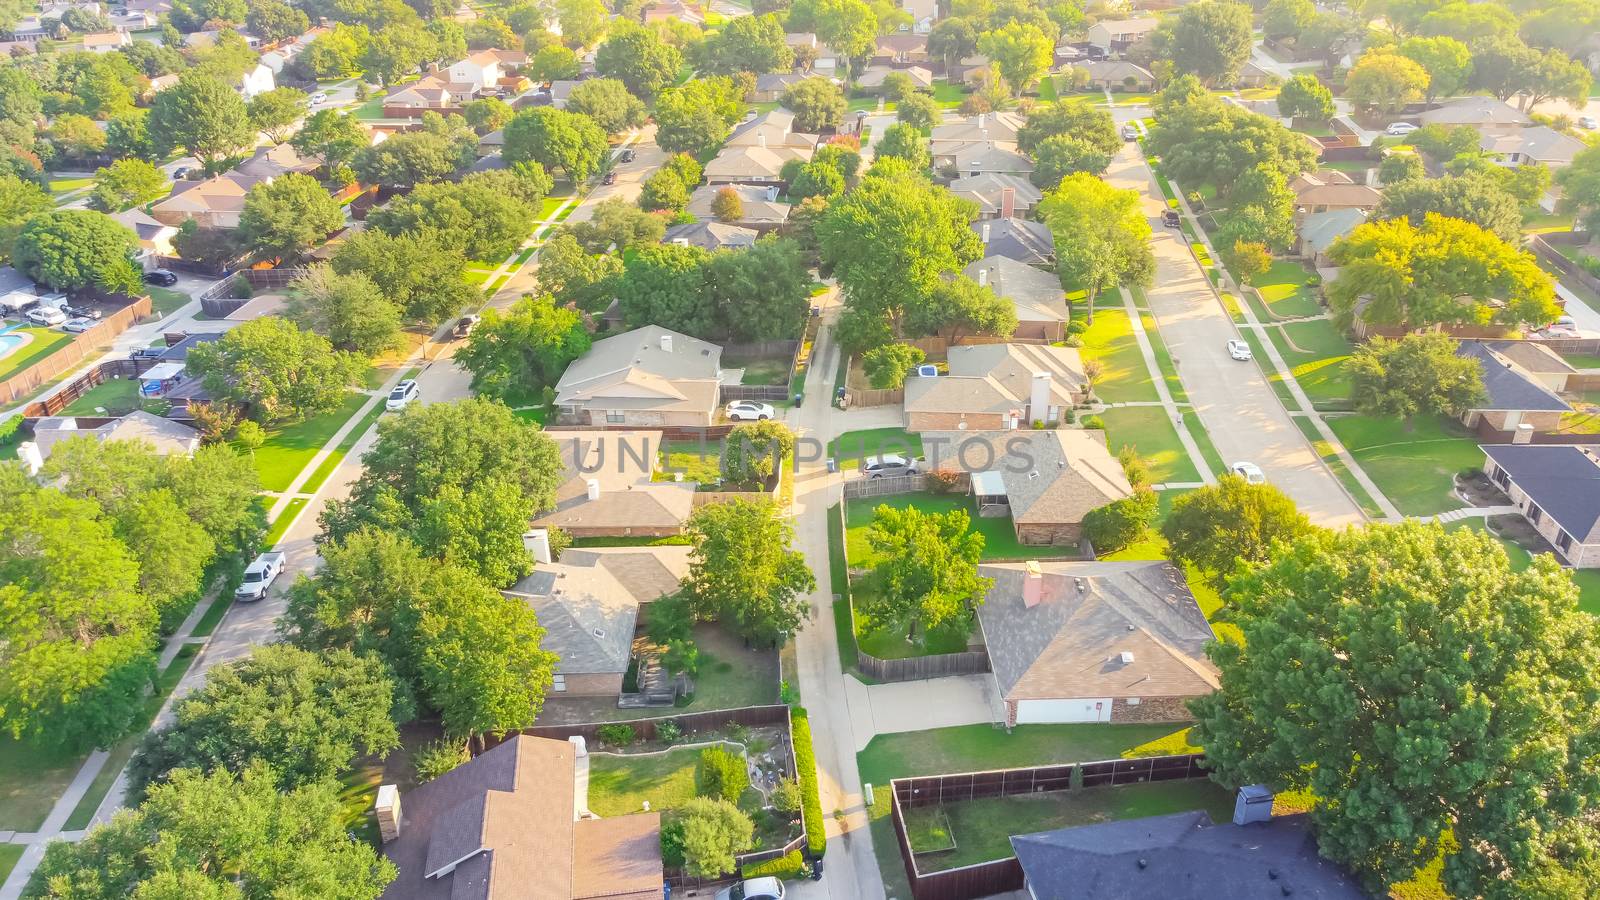 Bird eye view clean and peaceful neighborhood streets with row of single family homes near Dallas, Texas, USA by trongnguyen